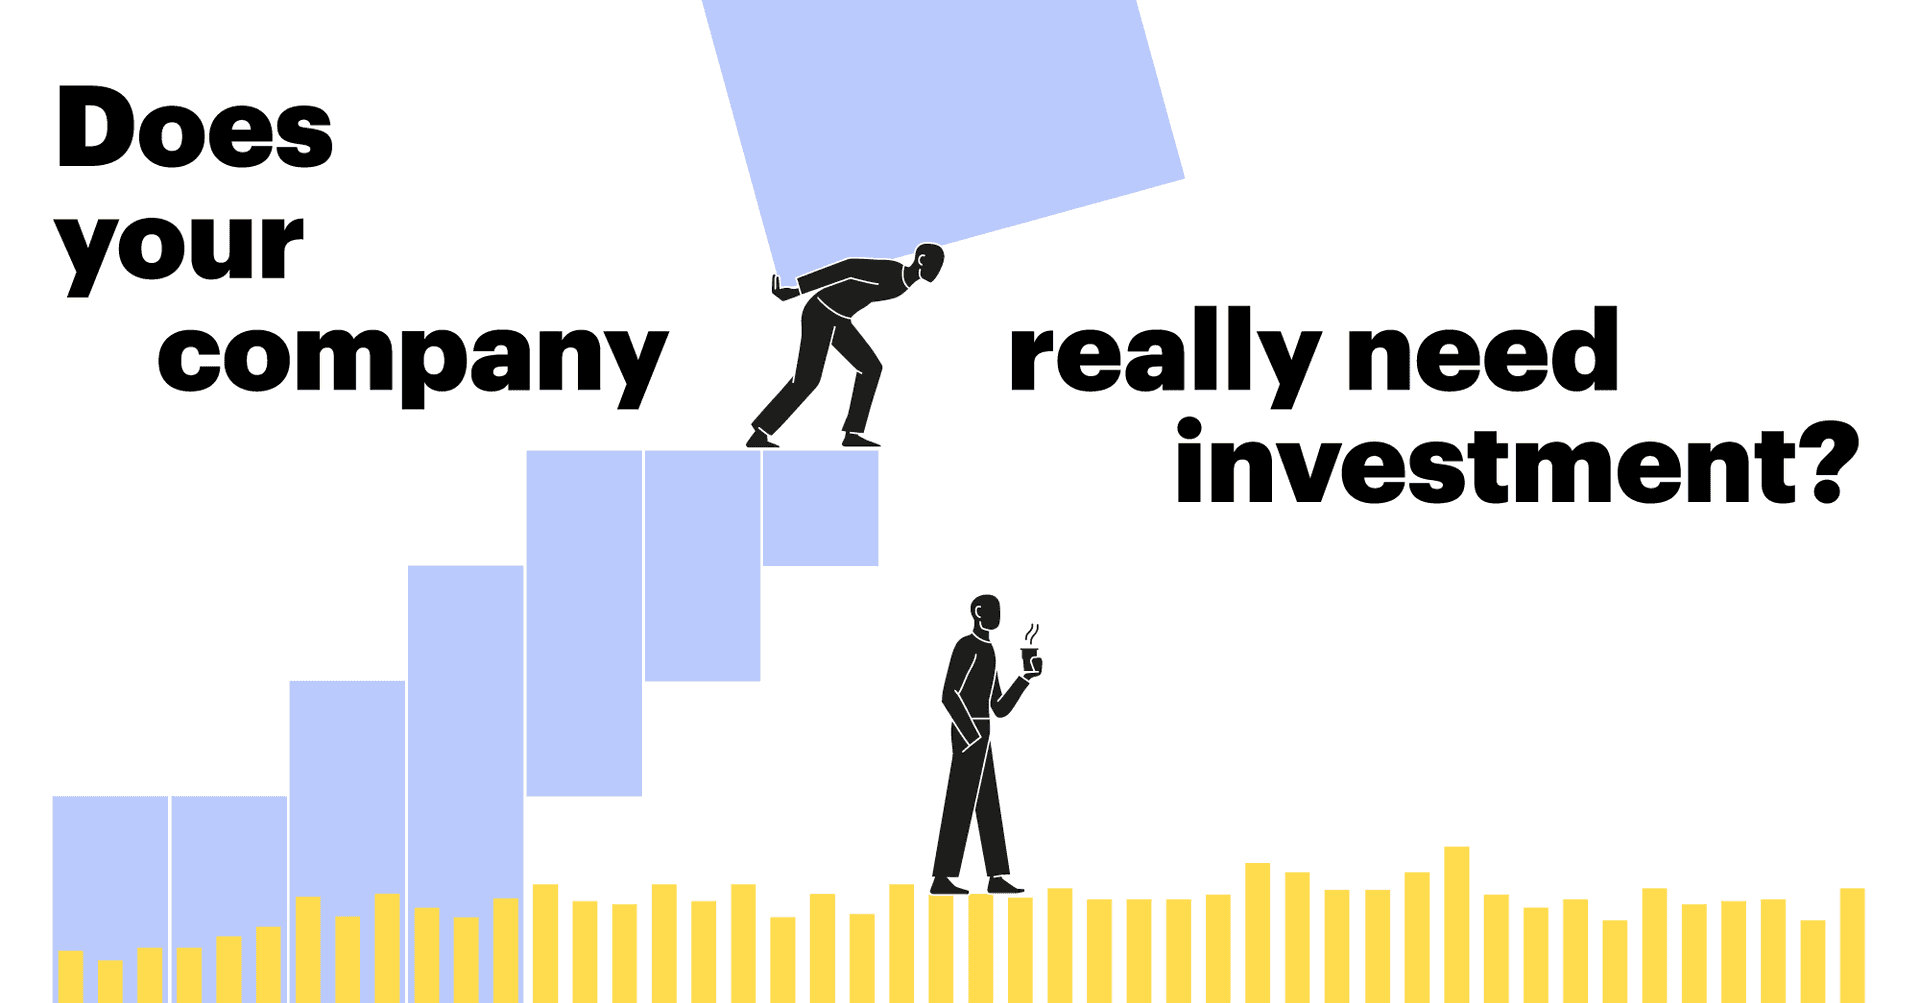 Does your company really need investment?